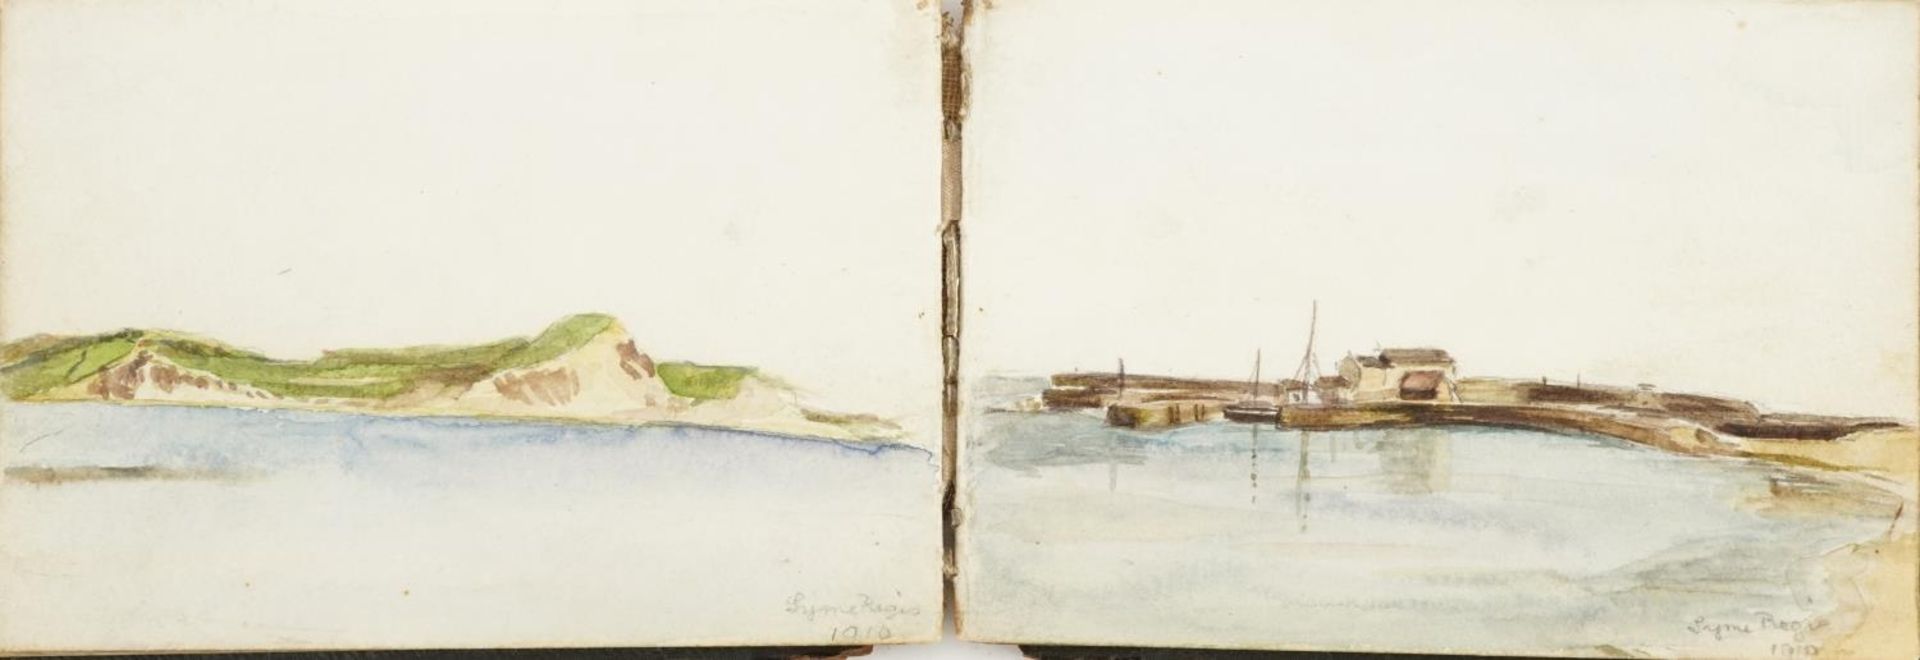 Early 20th century artist's travel sketchbook housing various watercolours and pencil sketches - Image 9 of 15